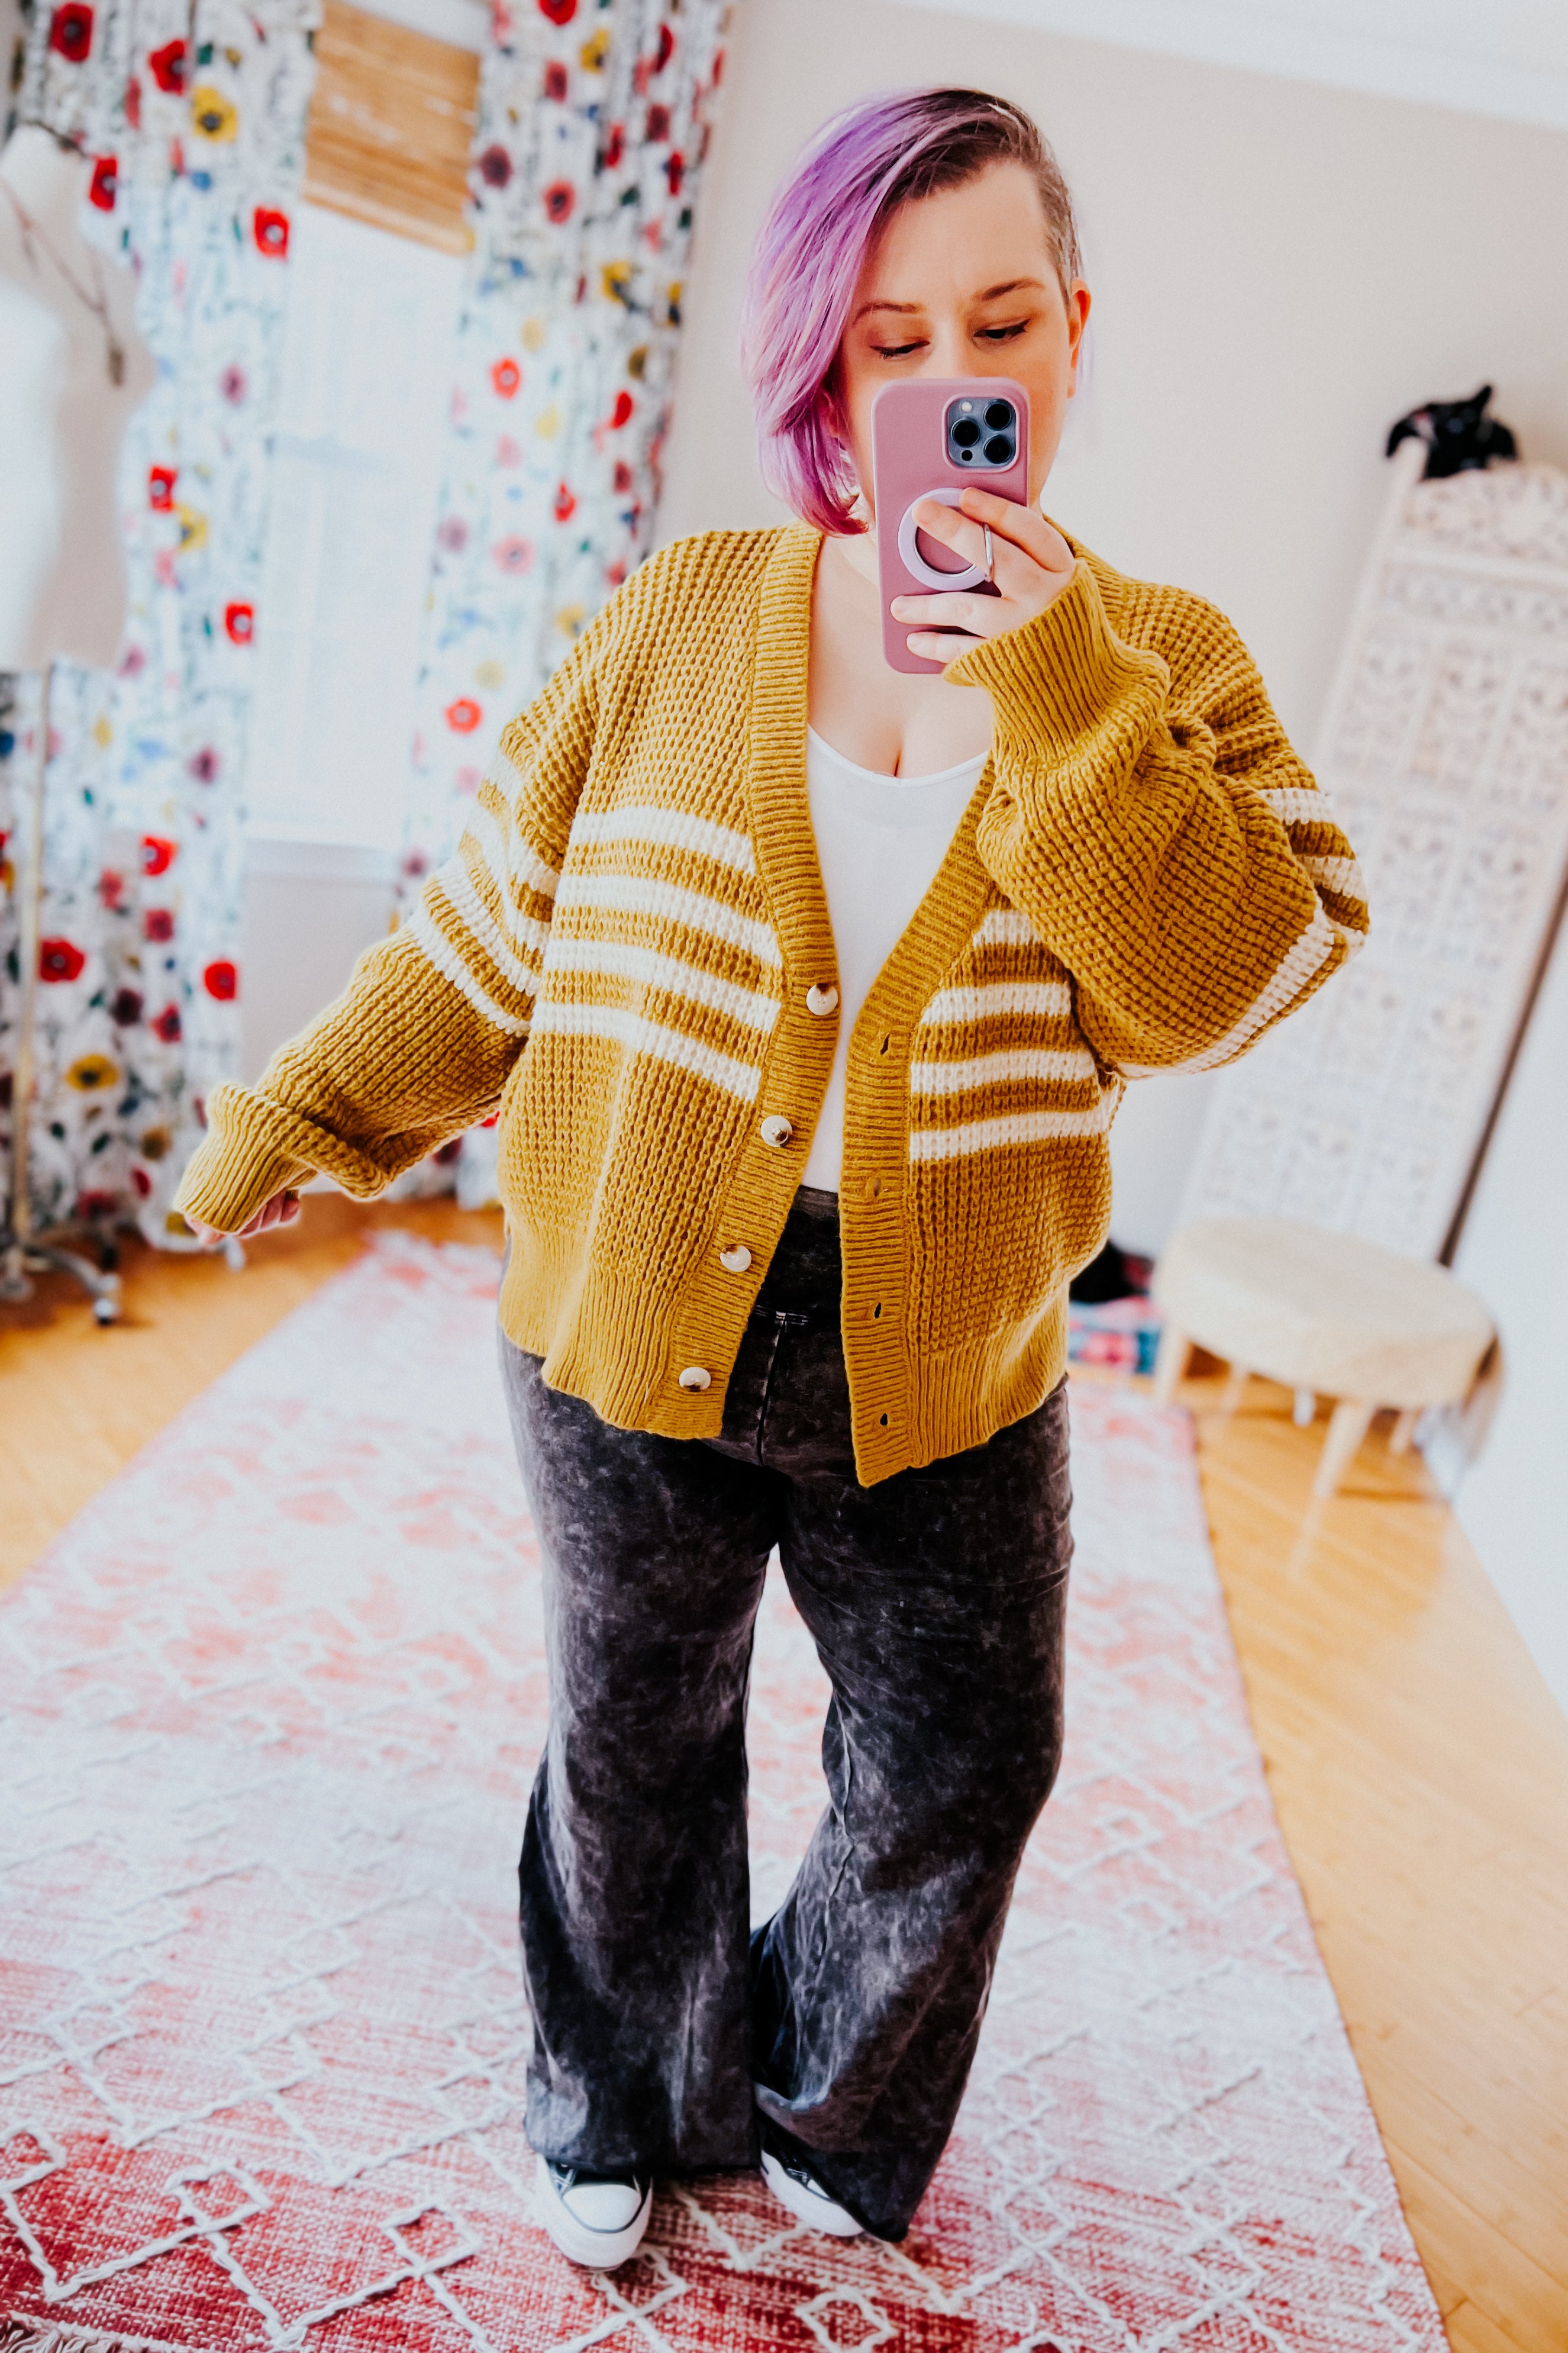 On Top of the World Striped Cardigan